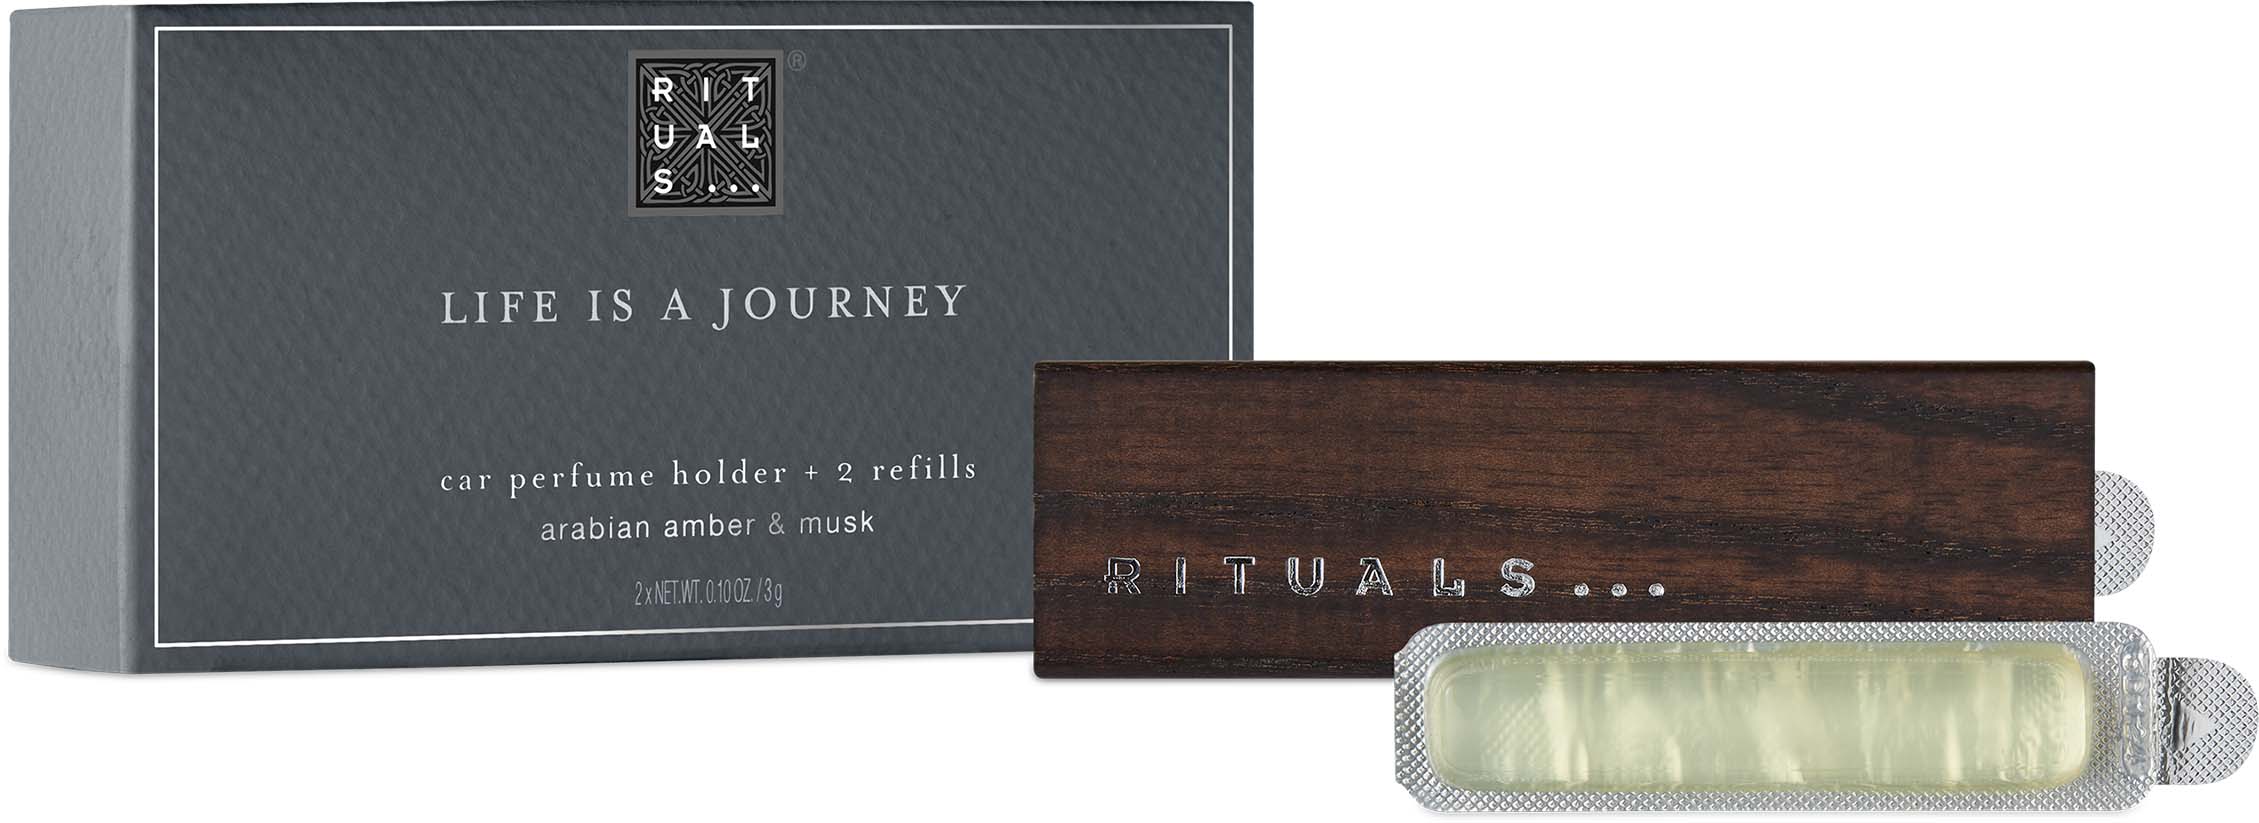 Life is a Journey - Sport Car Perfume